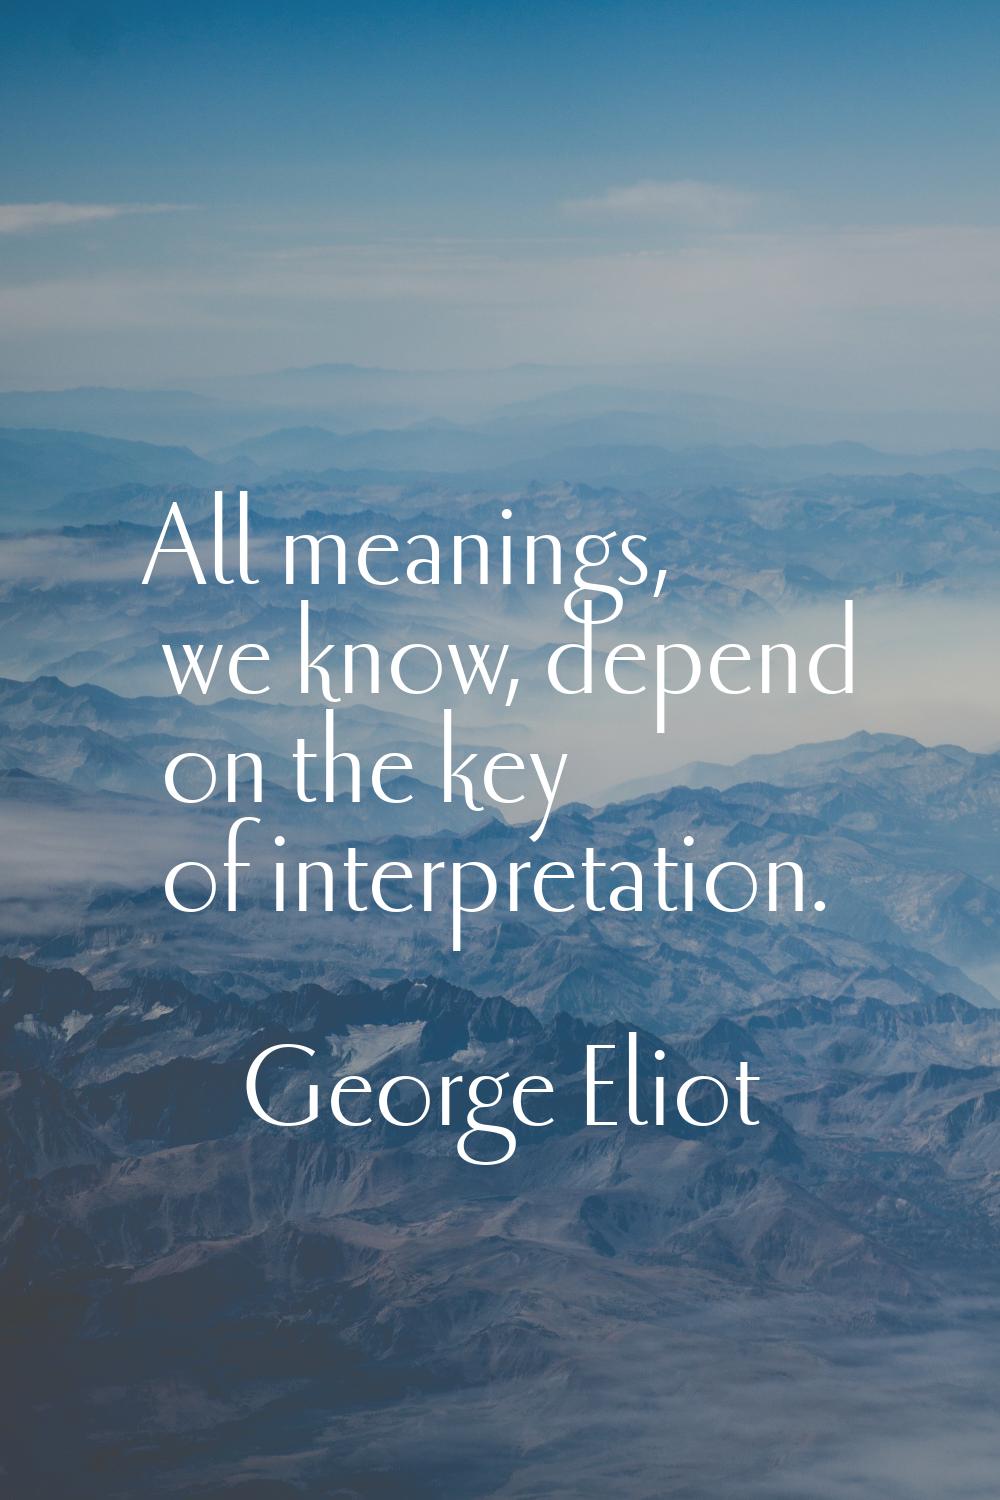 All meanings, we know, depend on the key of interpretation.